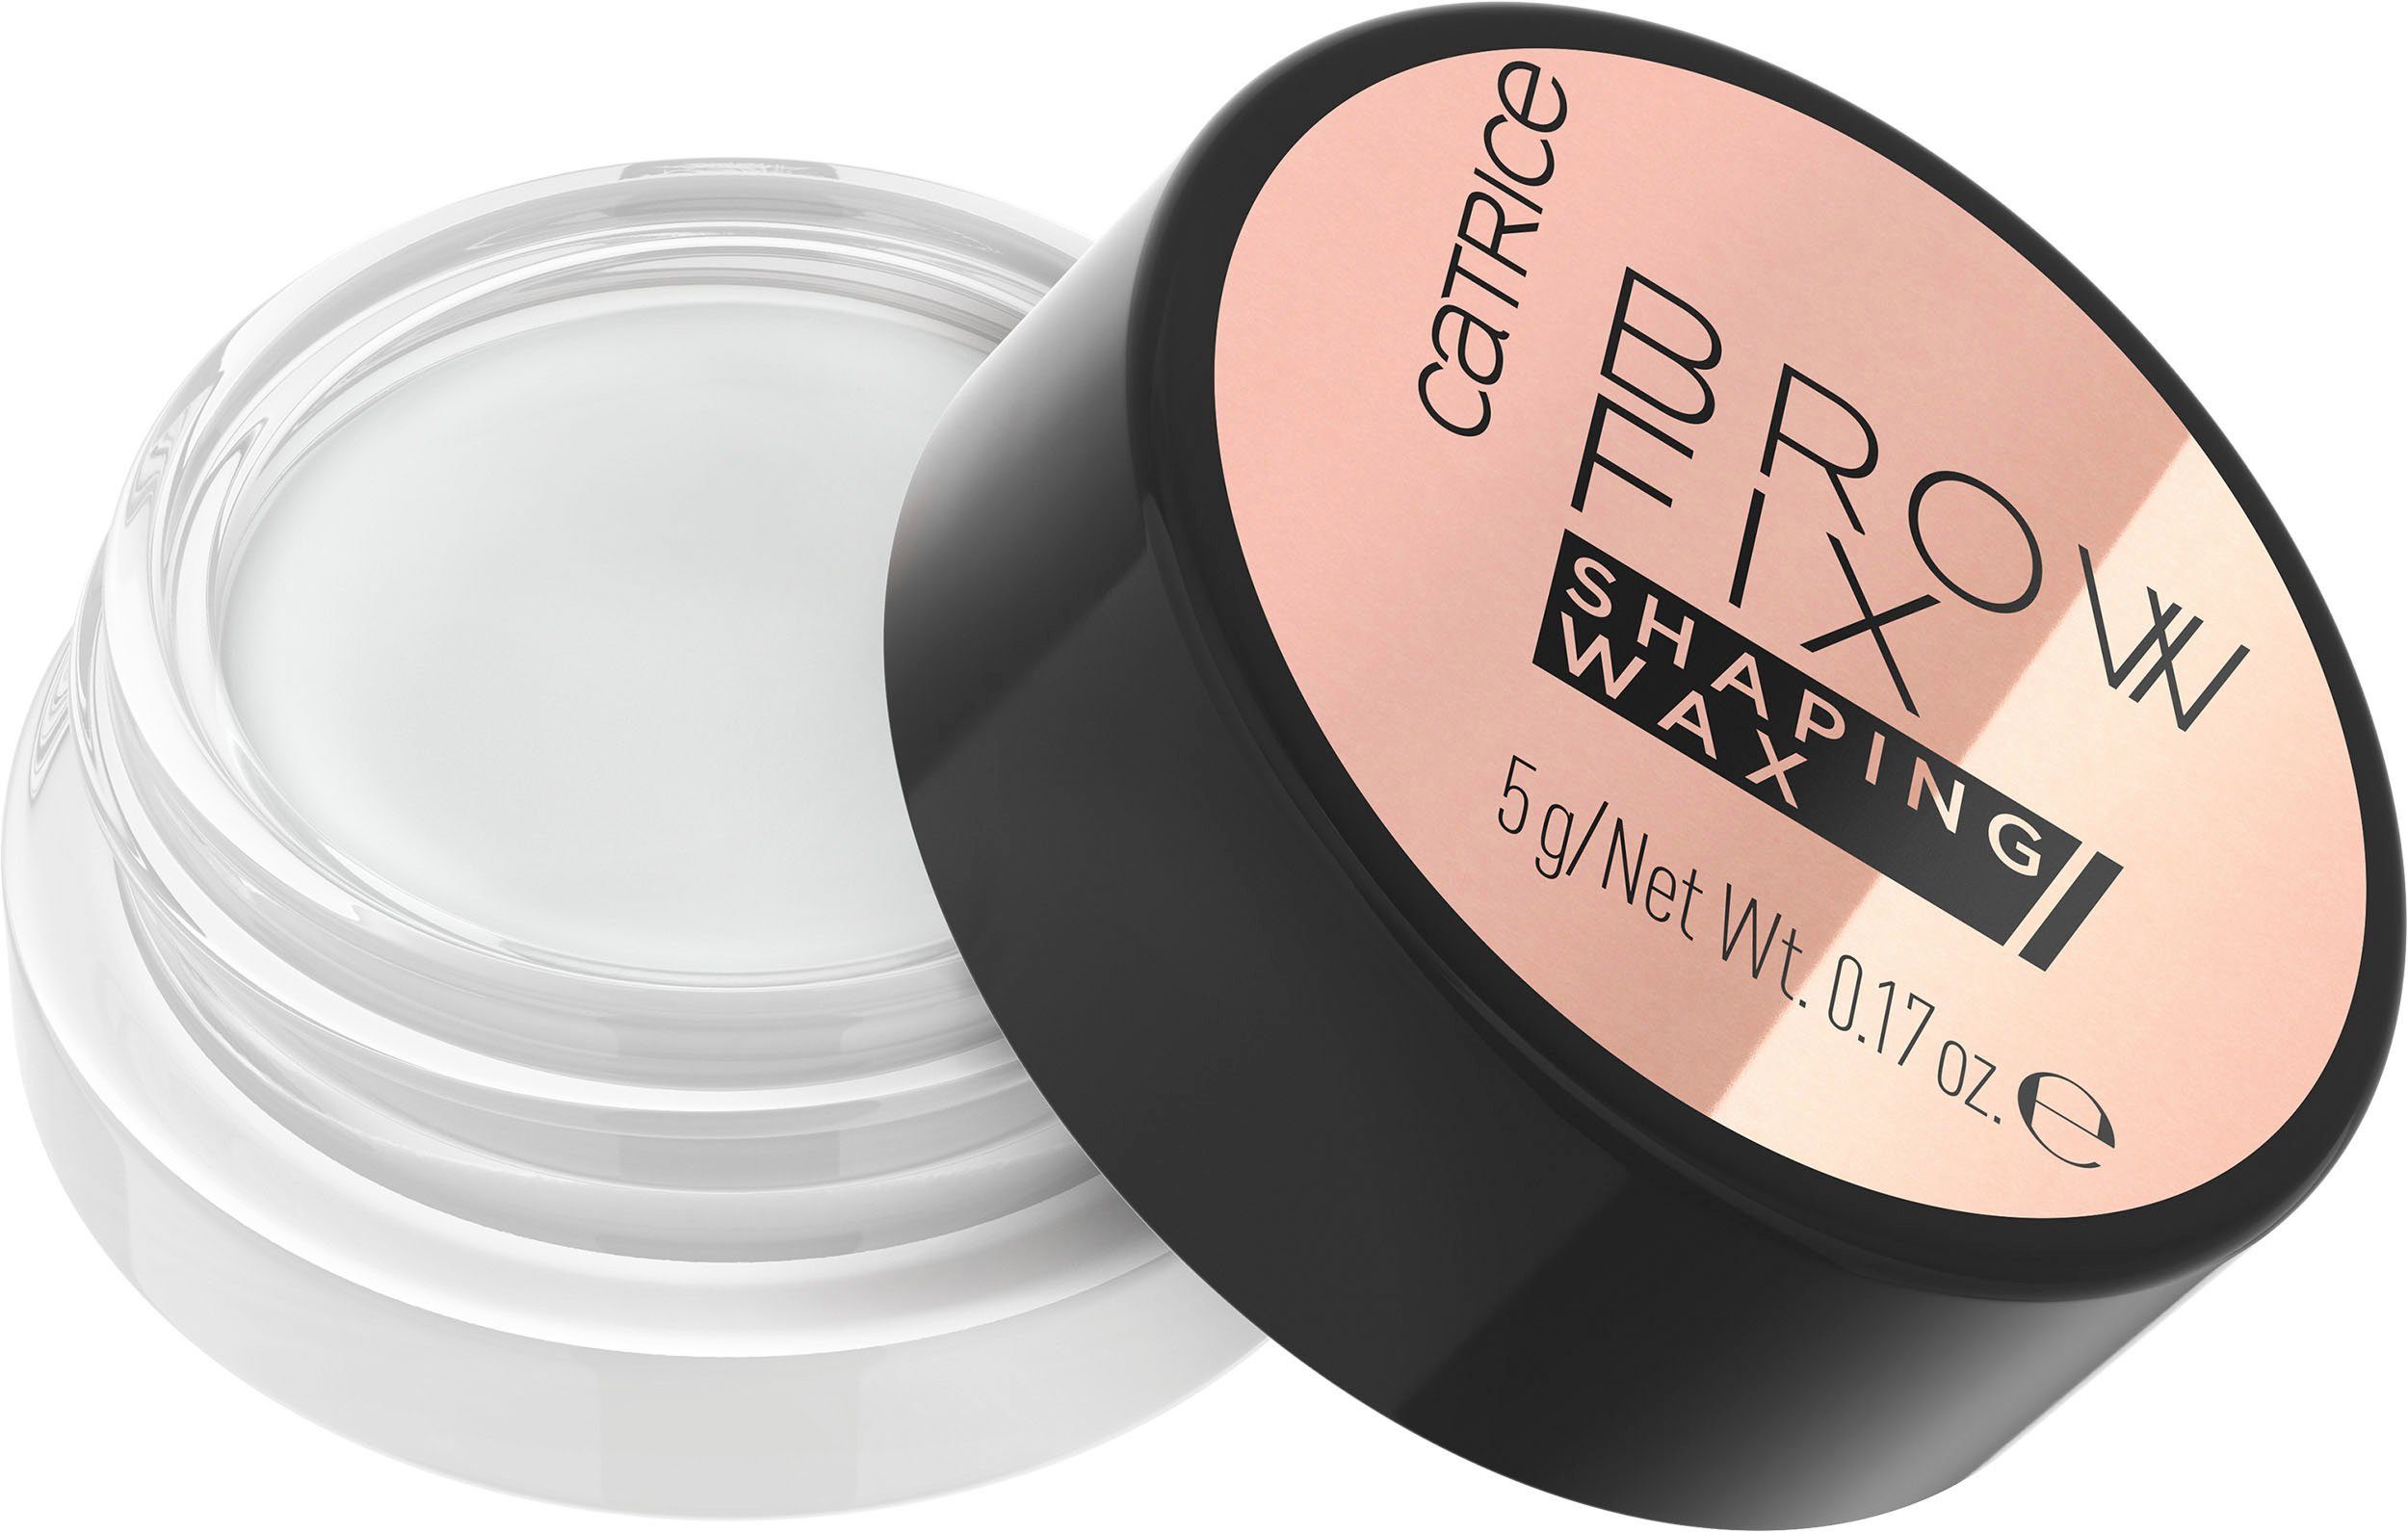 Shaping Catrice 010, 3-tlg. Wax Augenbrauen-Gel Fix Catrice Brow